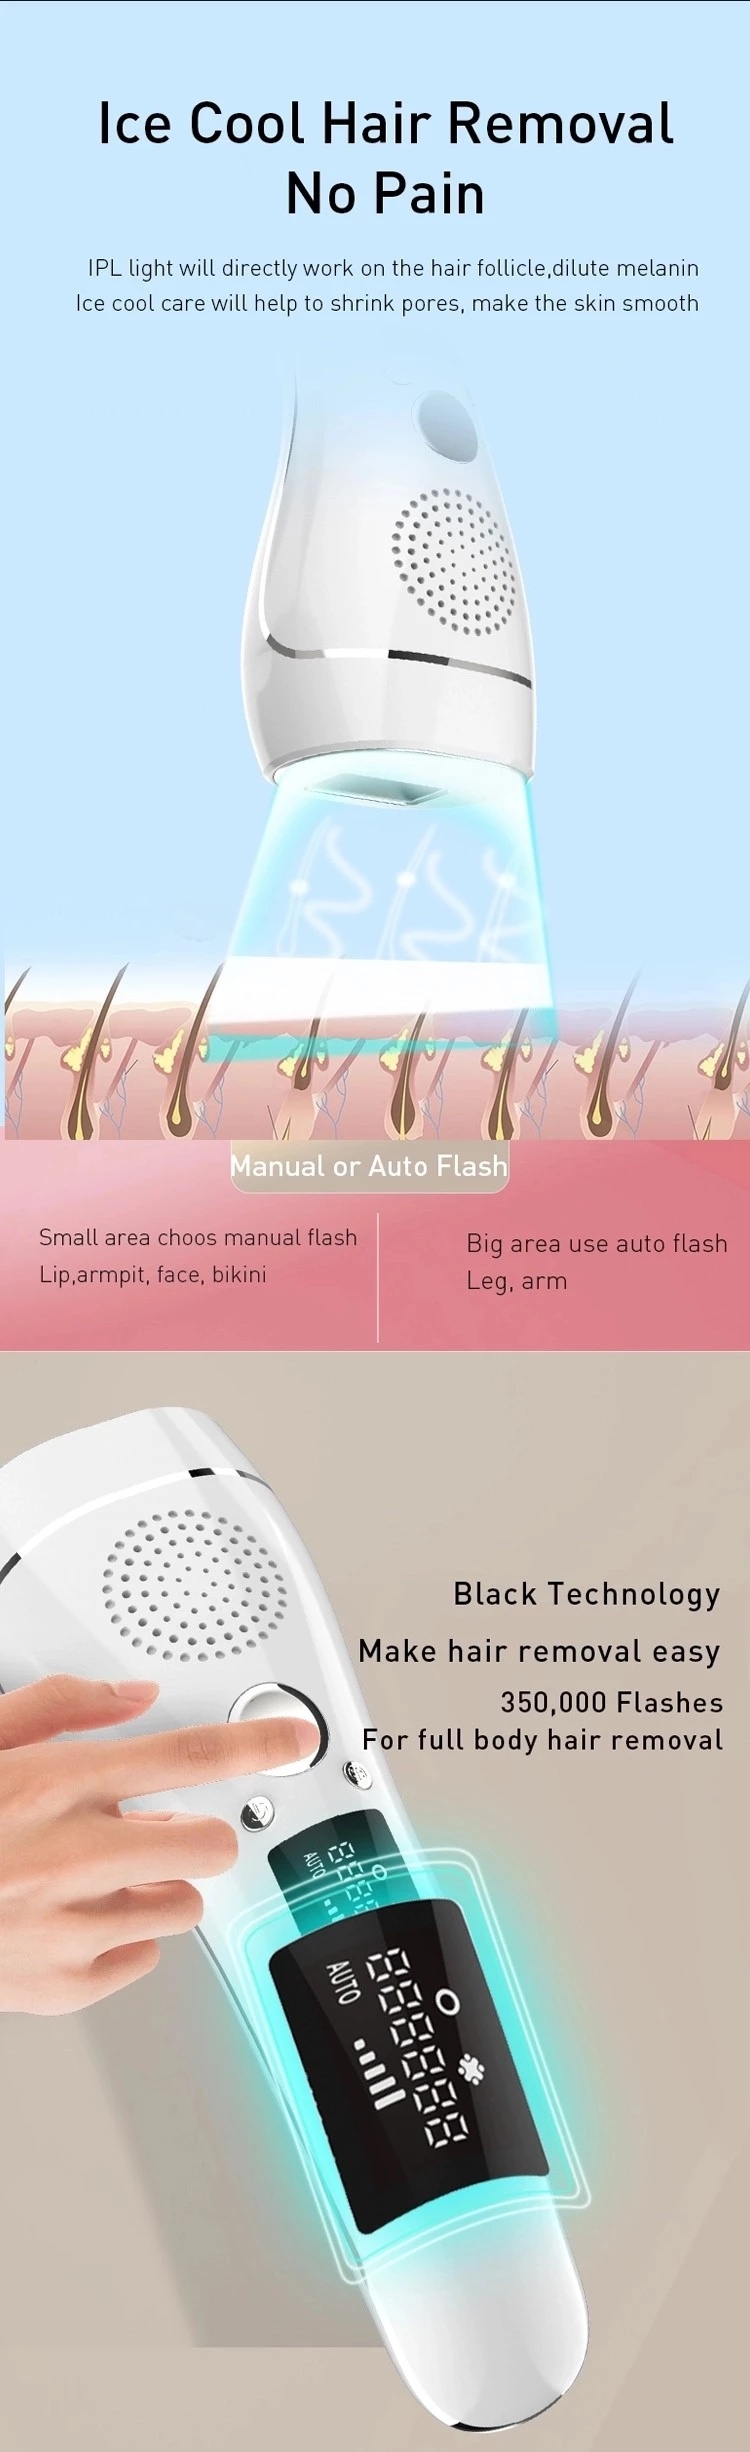 Whitening Technology Ice Cool IPL Hair Removal